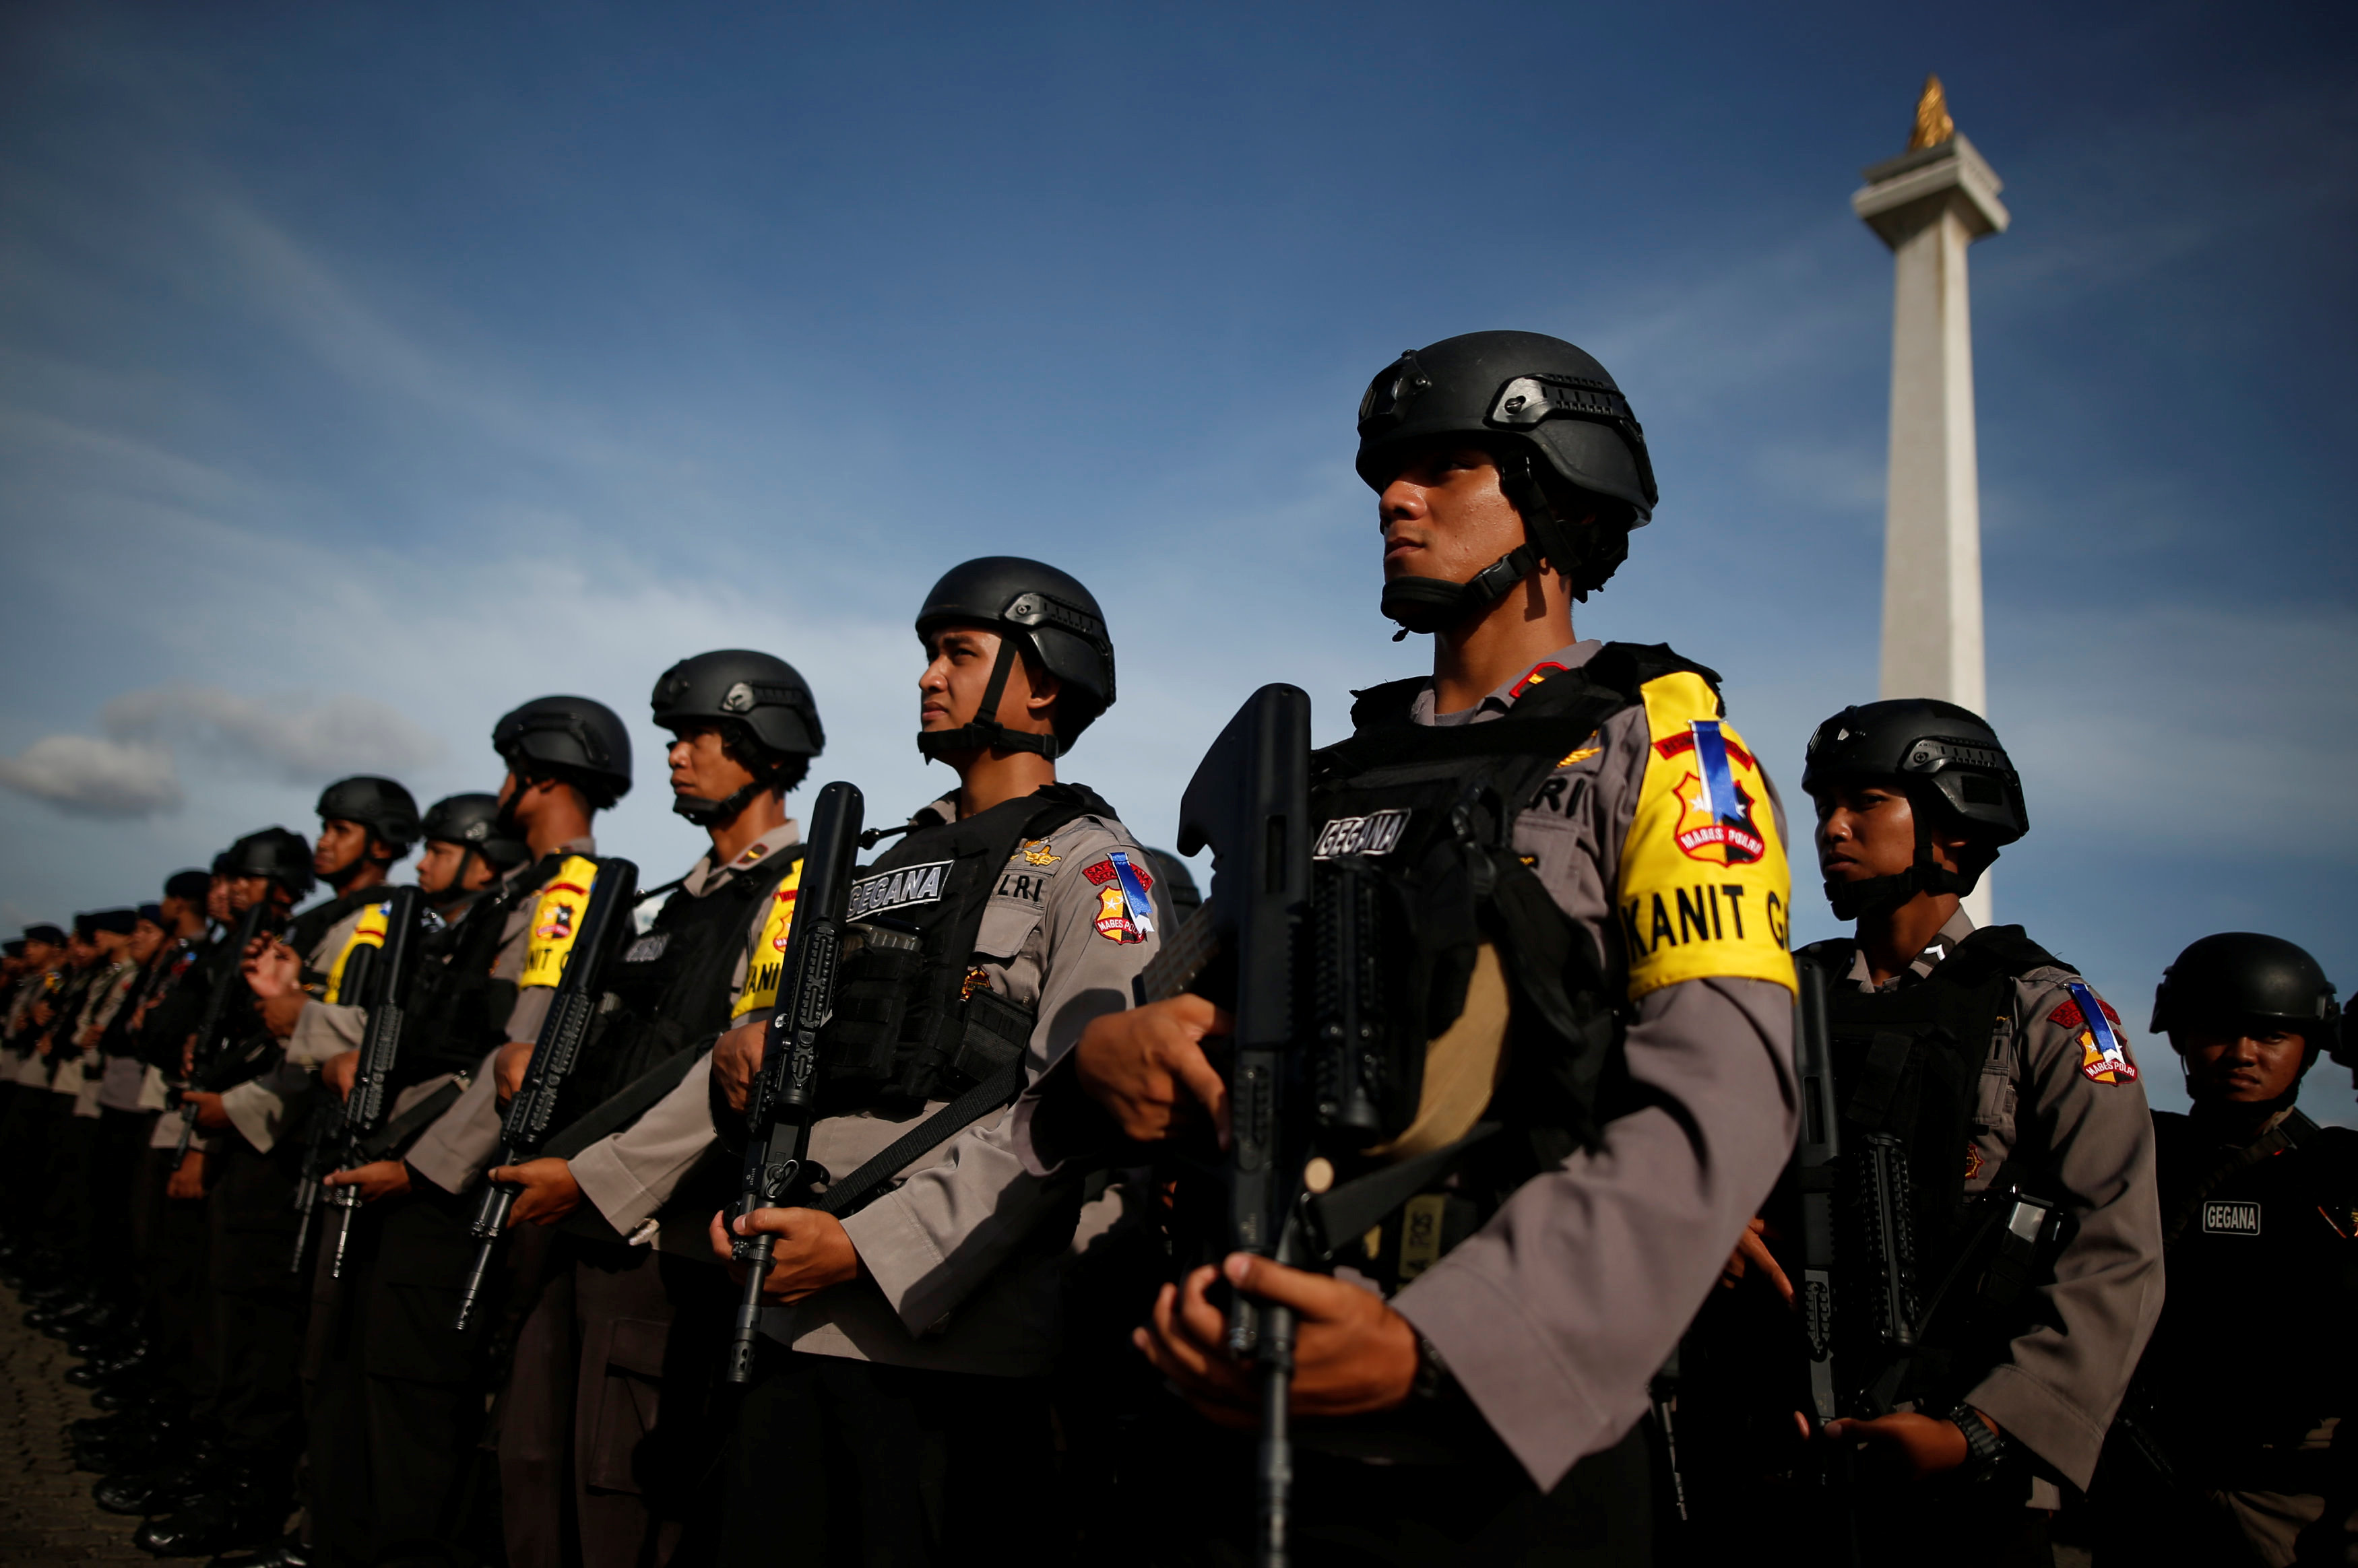 Indonesian police attend a security briefing at the National Monument before deployment during the Christmas and New Year holidays in Jakarta, Indonesia December 22, 2016.REUTERS/Darren Whitesiden